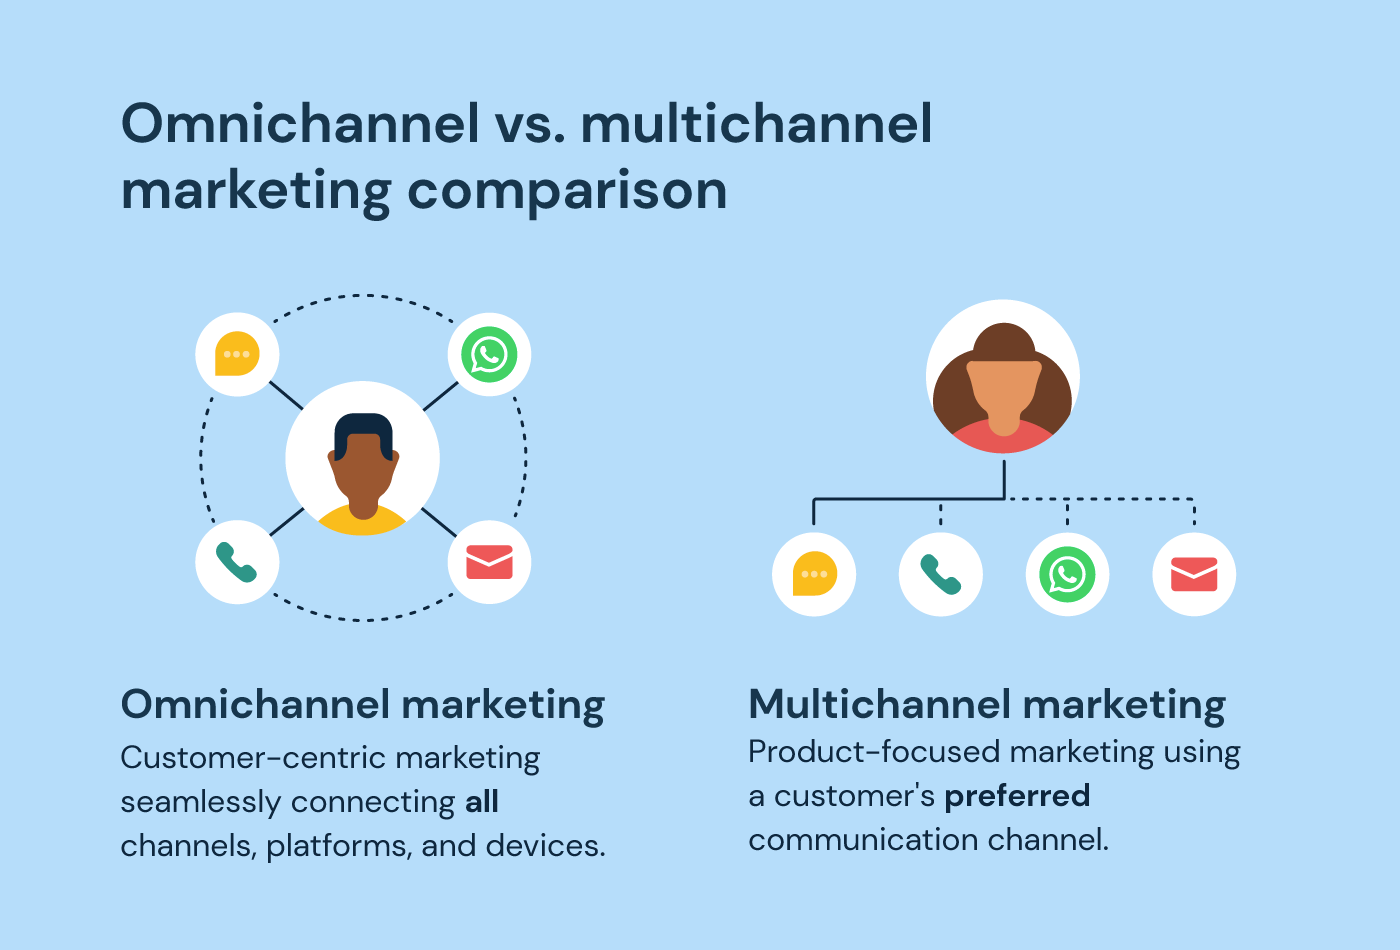 The differences between omnichannel and multichannel marketing